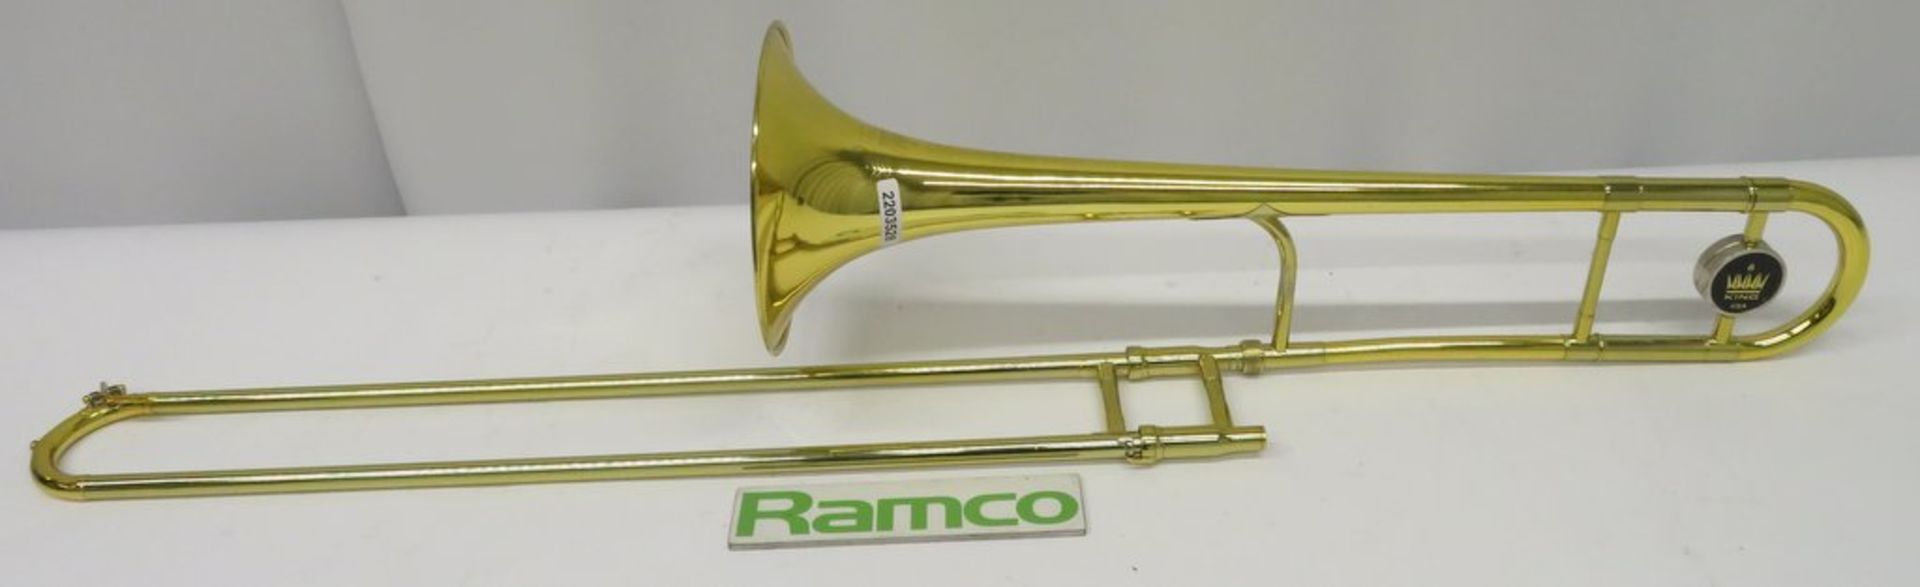 King USA 2013 3B Legend Series Trombone Standard Complete With Case. - Image 5 of 17